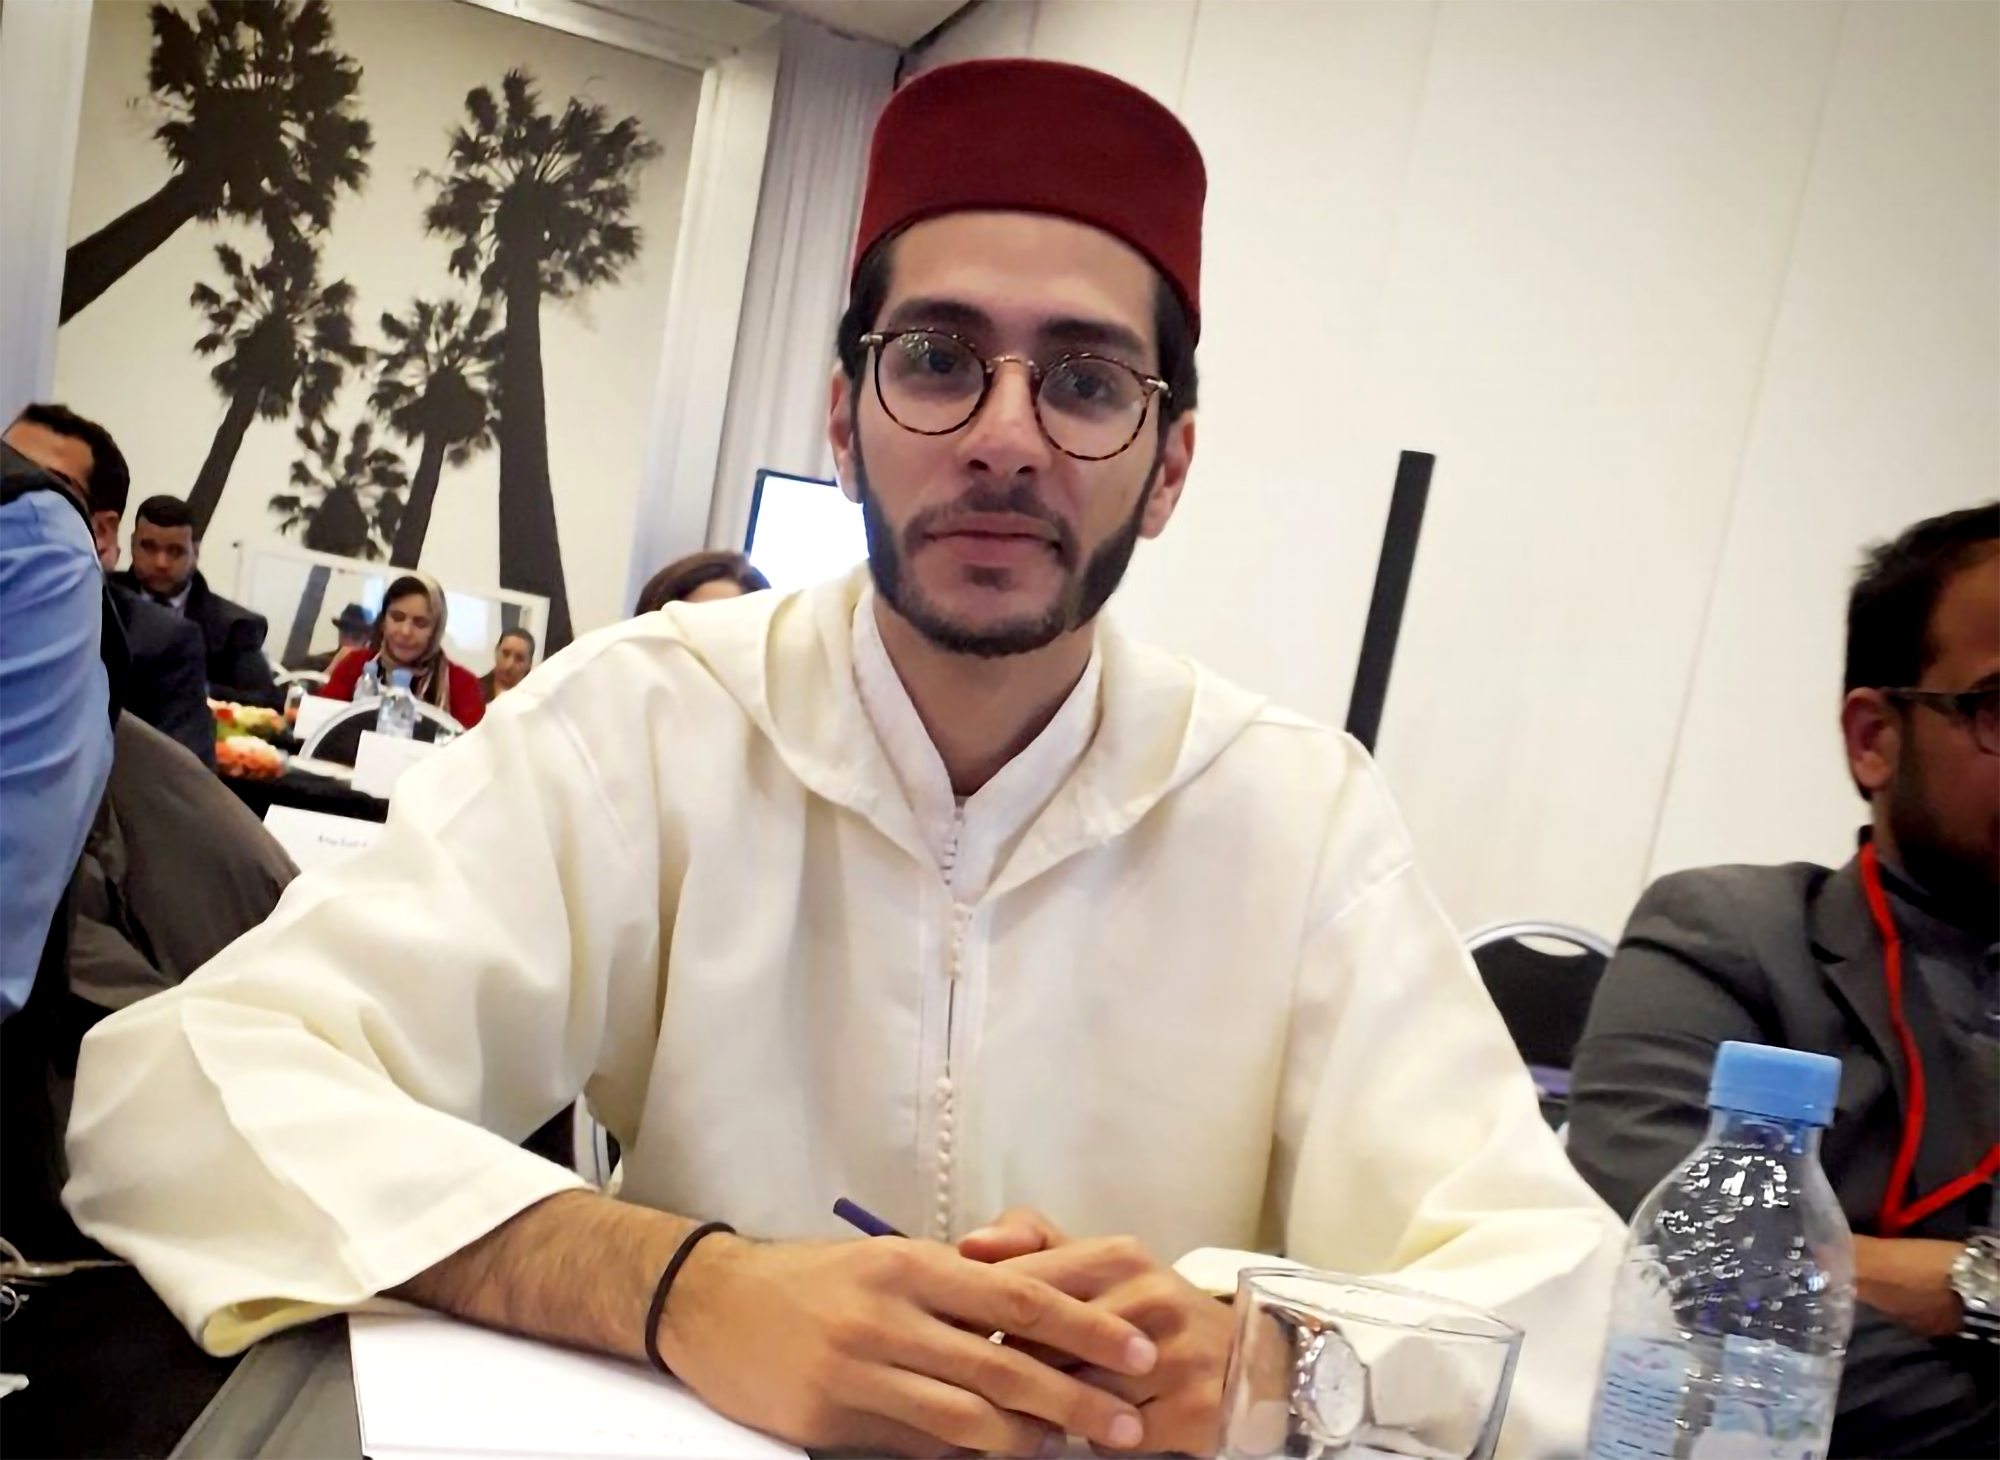 First Moroccan under the age of 30, Nidal Benali, appointed to represent the UN Major Group for Children and Youth (UN MGCY) by the United Nations as one of the Global Focal Point for Peace and Security.